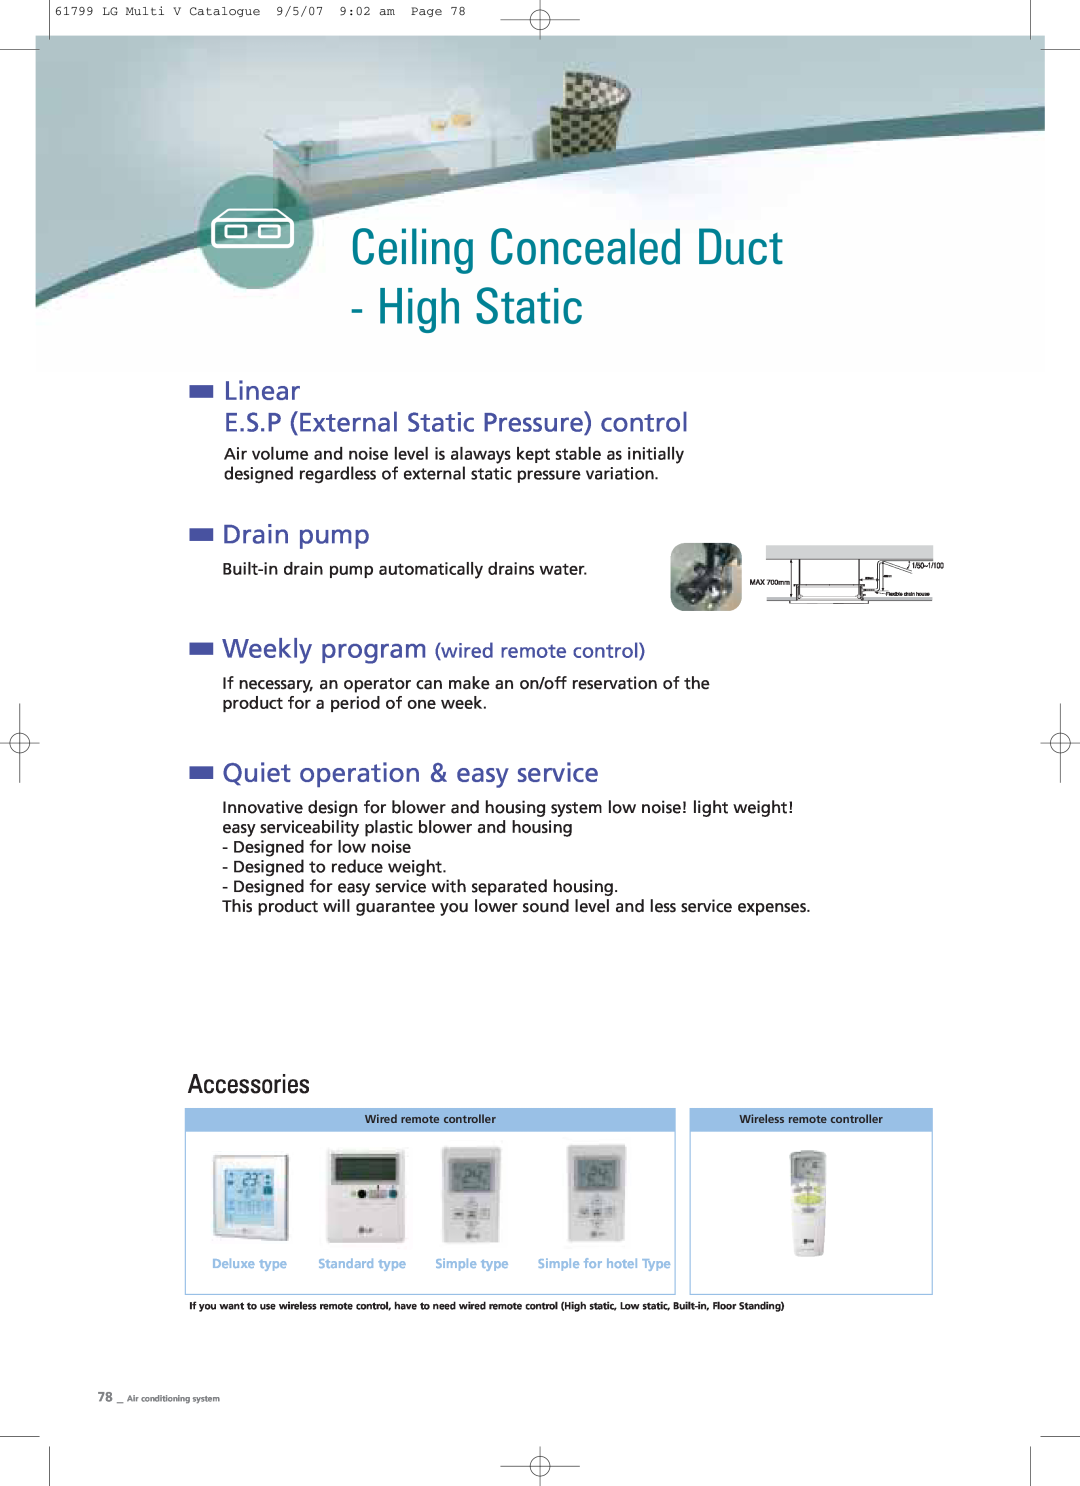 LG Electronics PRHR040 Ceiling Concealed Duct - High Static, Linear E.S.P External Static Pressure control, Drain pump 